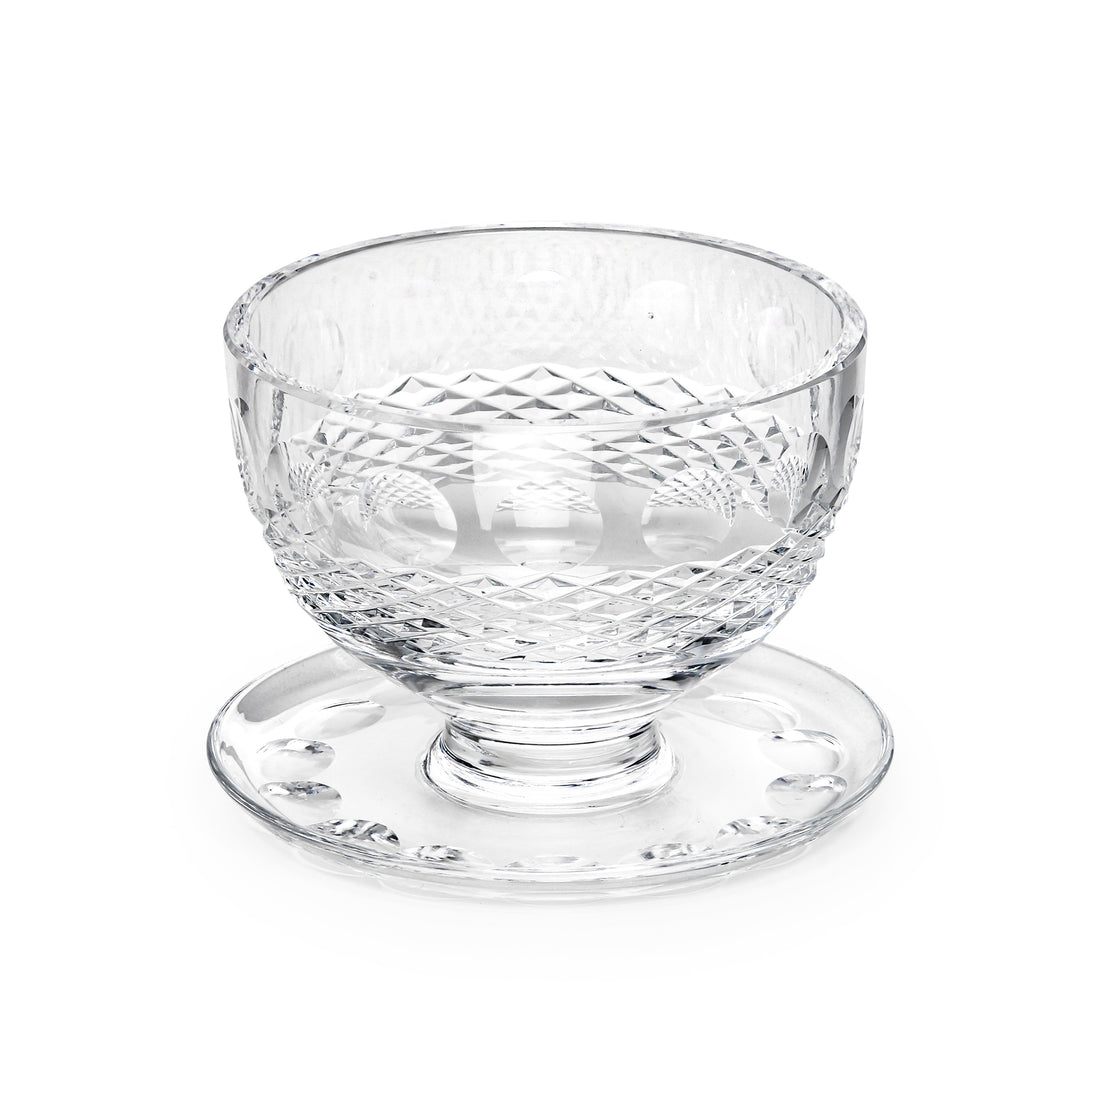 WATERFORD Colleen Footed Dessert Glasses - Set of 4